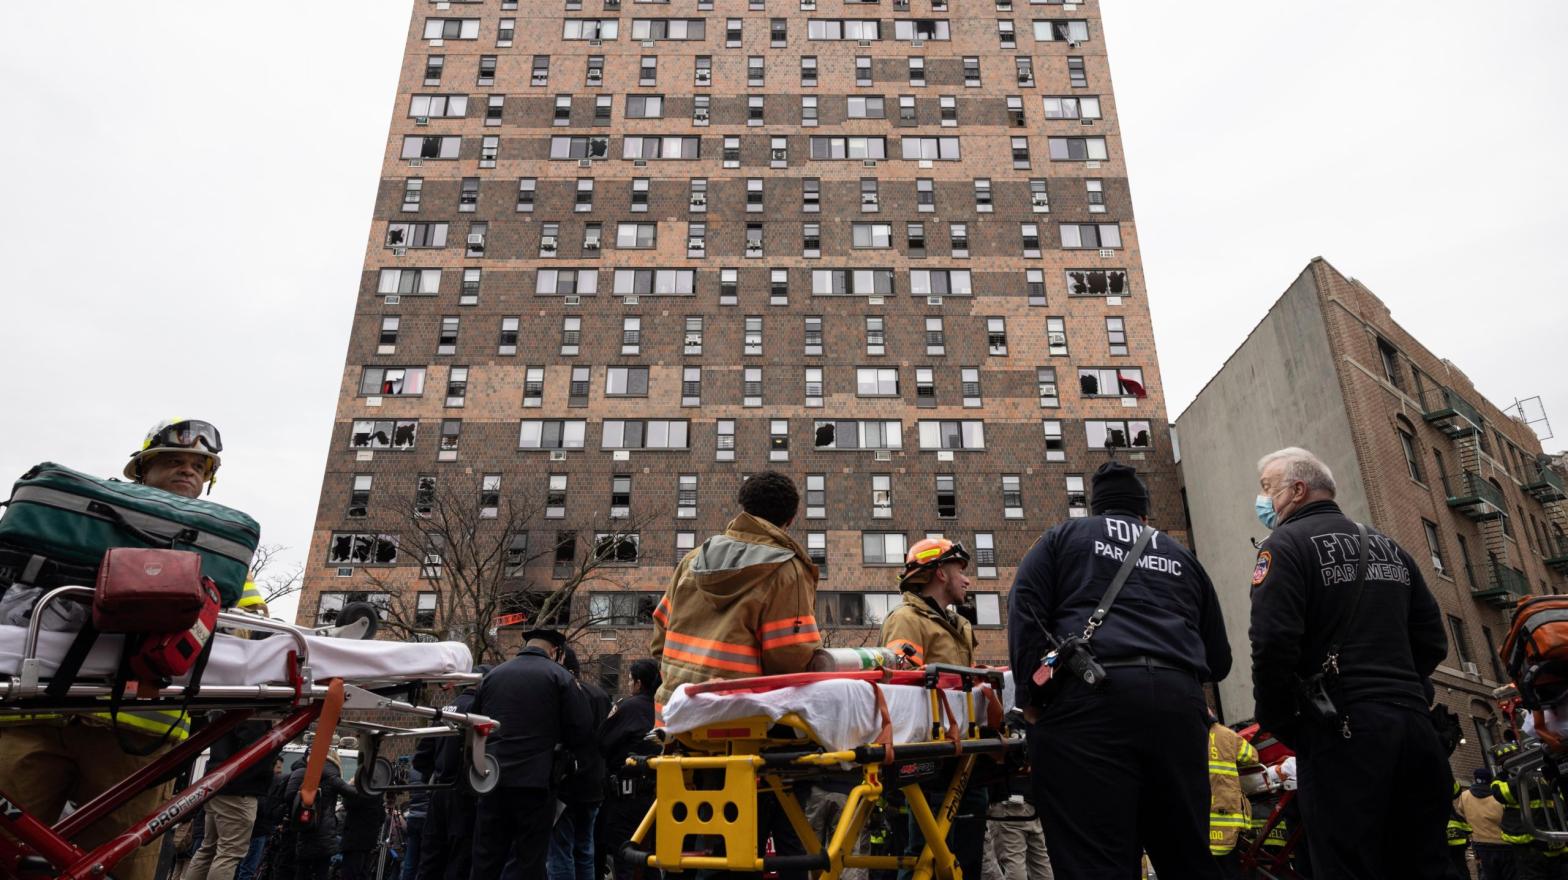 Emergency personnel work at the scene of a fatal fire at an apartment building in the Bronx on Sunday, Jan. 9, 2022, in New York.  (Photo: Yuki Iwamura, AP)